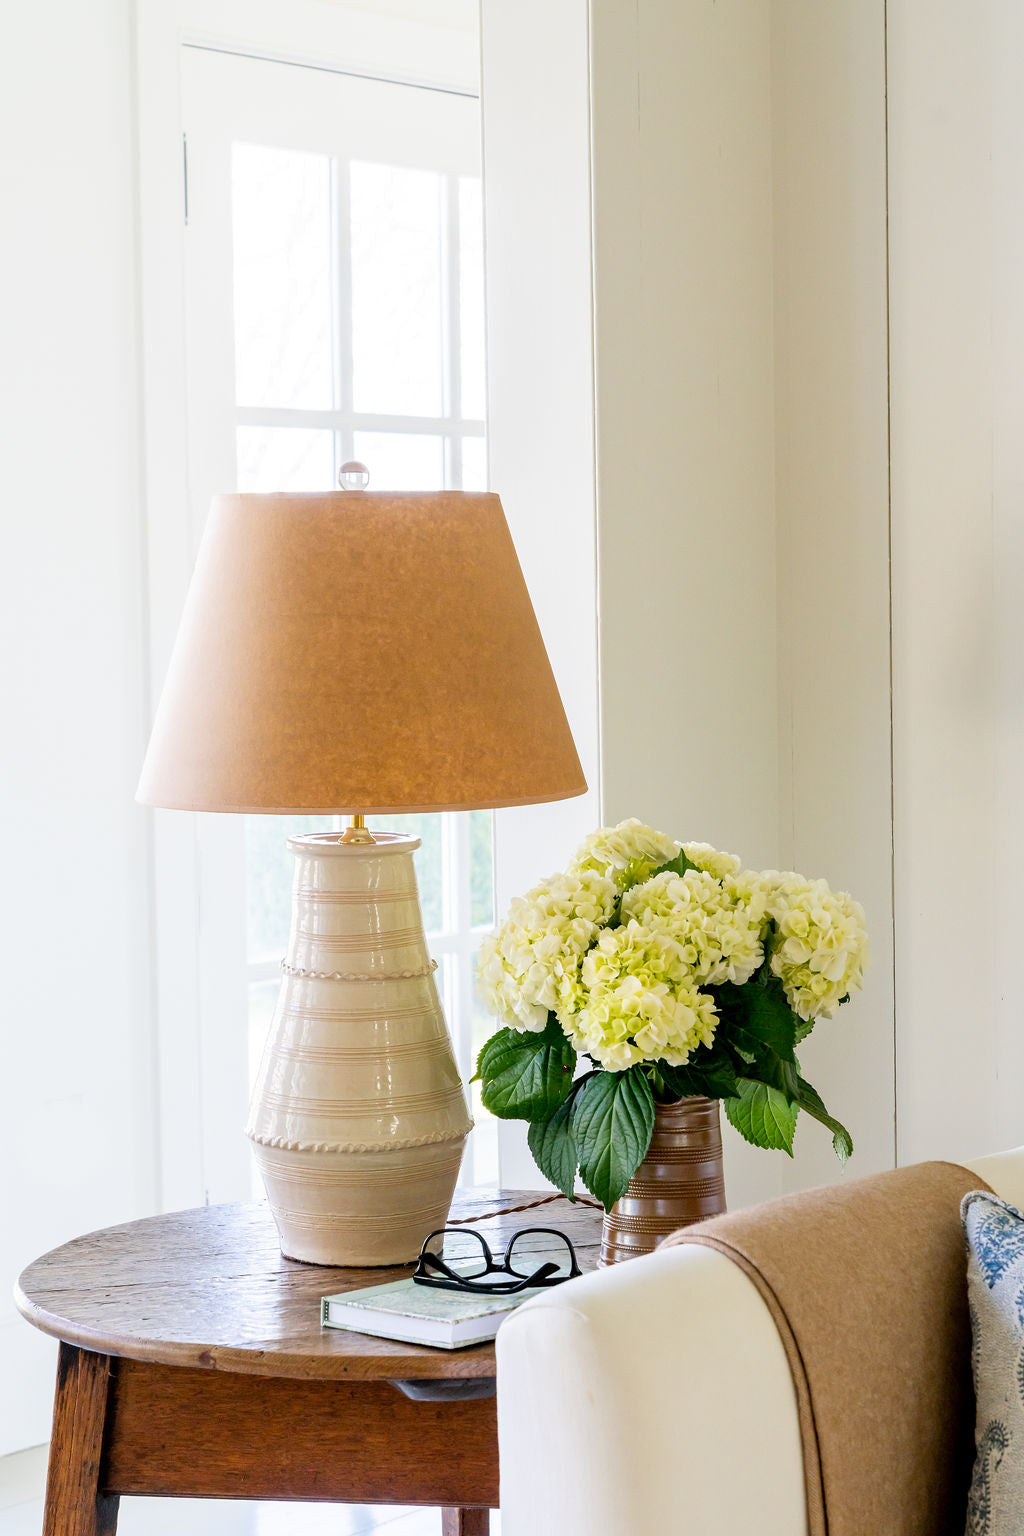 A Blonde Ribbed Vase Ceramic Table Lamp by Penny Morrison | Newport Lamp And Shade | Located in Newport, RI